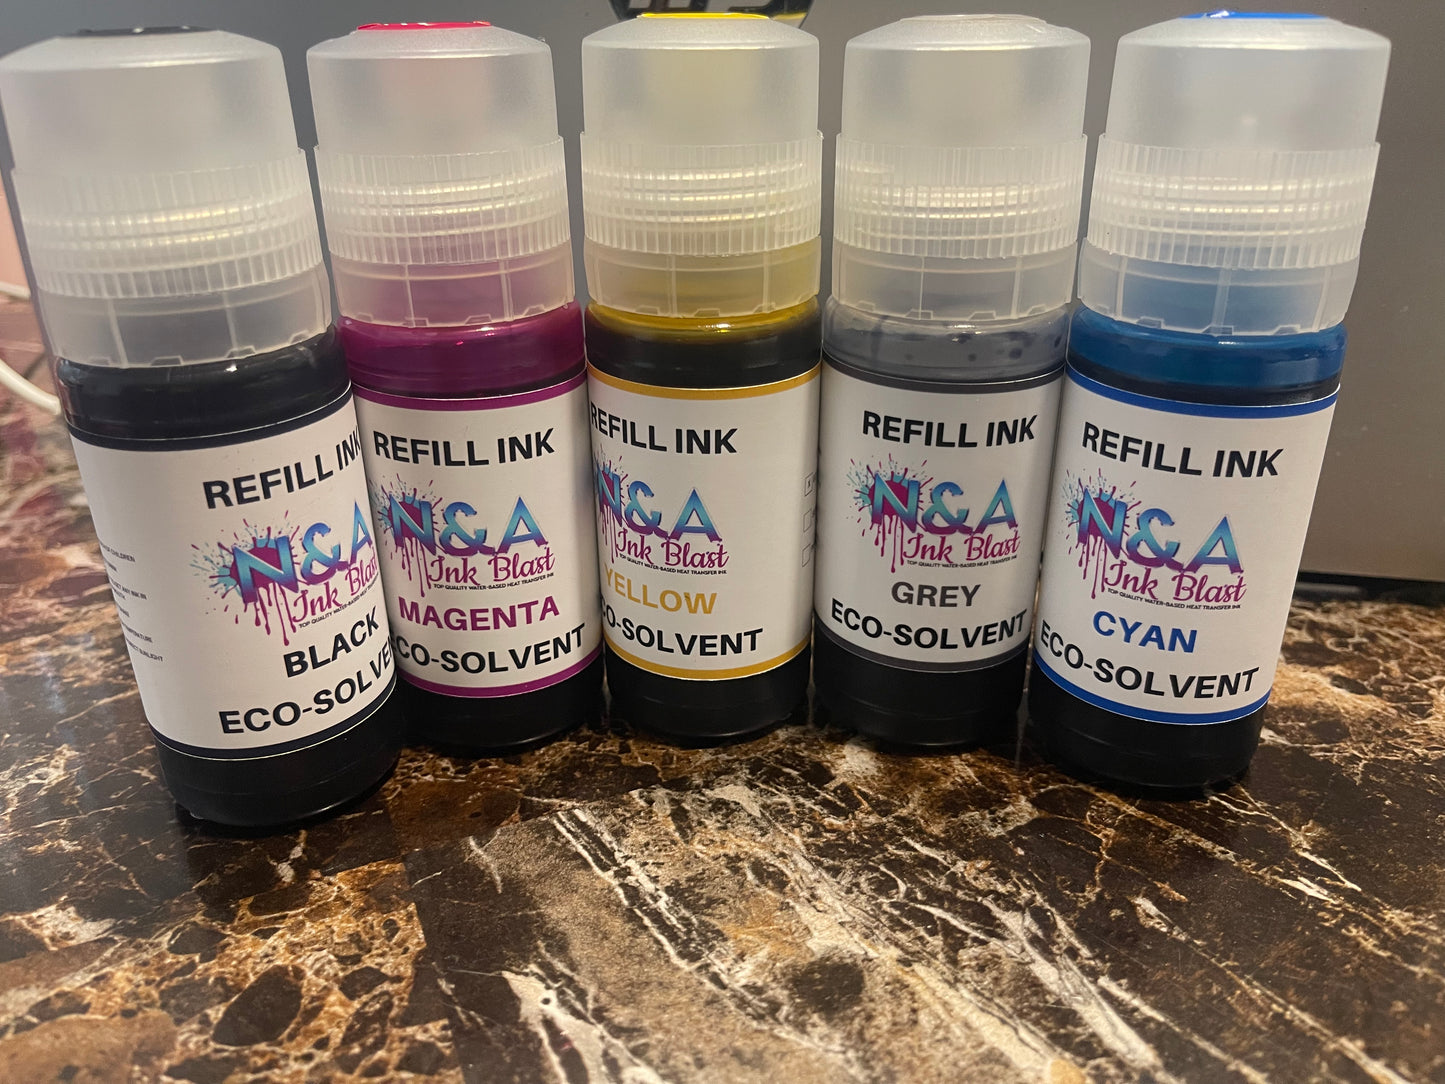 N&A Ink Blast Eco Solvent Ink